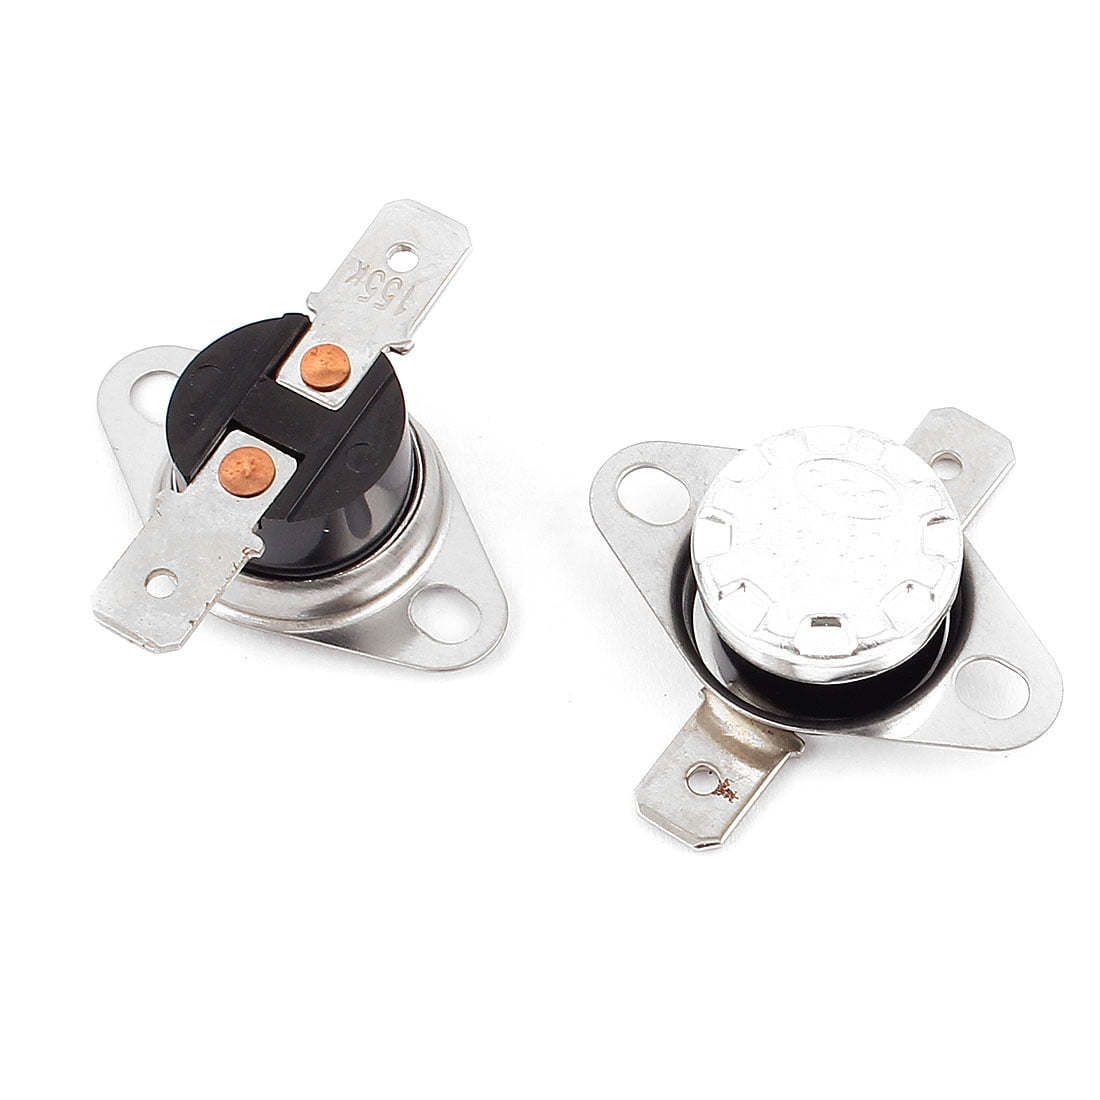 2Pcs 10A 250V KSD301 Thermostat Temperature Thermal Control Switch ** 